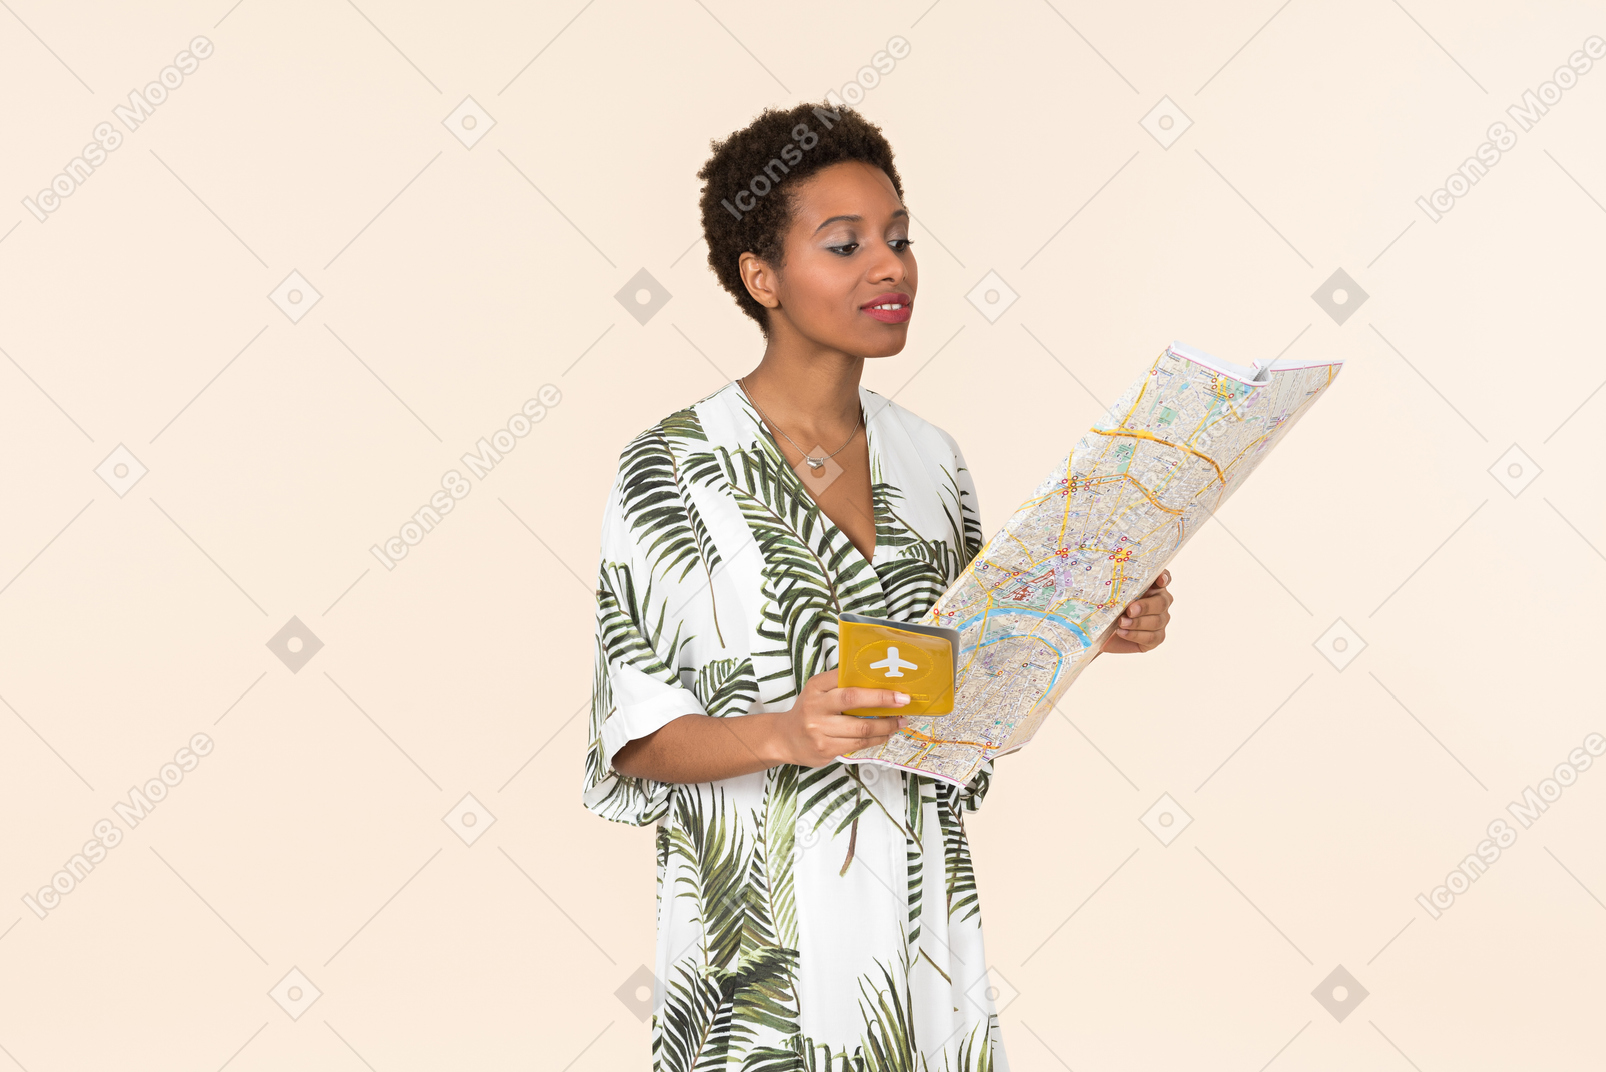 Black short-haired woman in a white and green dress, standing with an international passport and a map in her hands